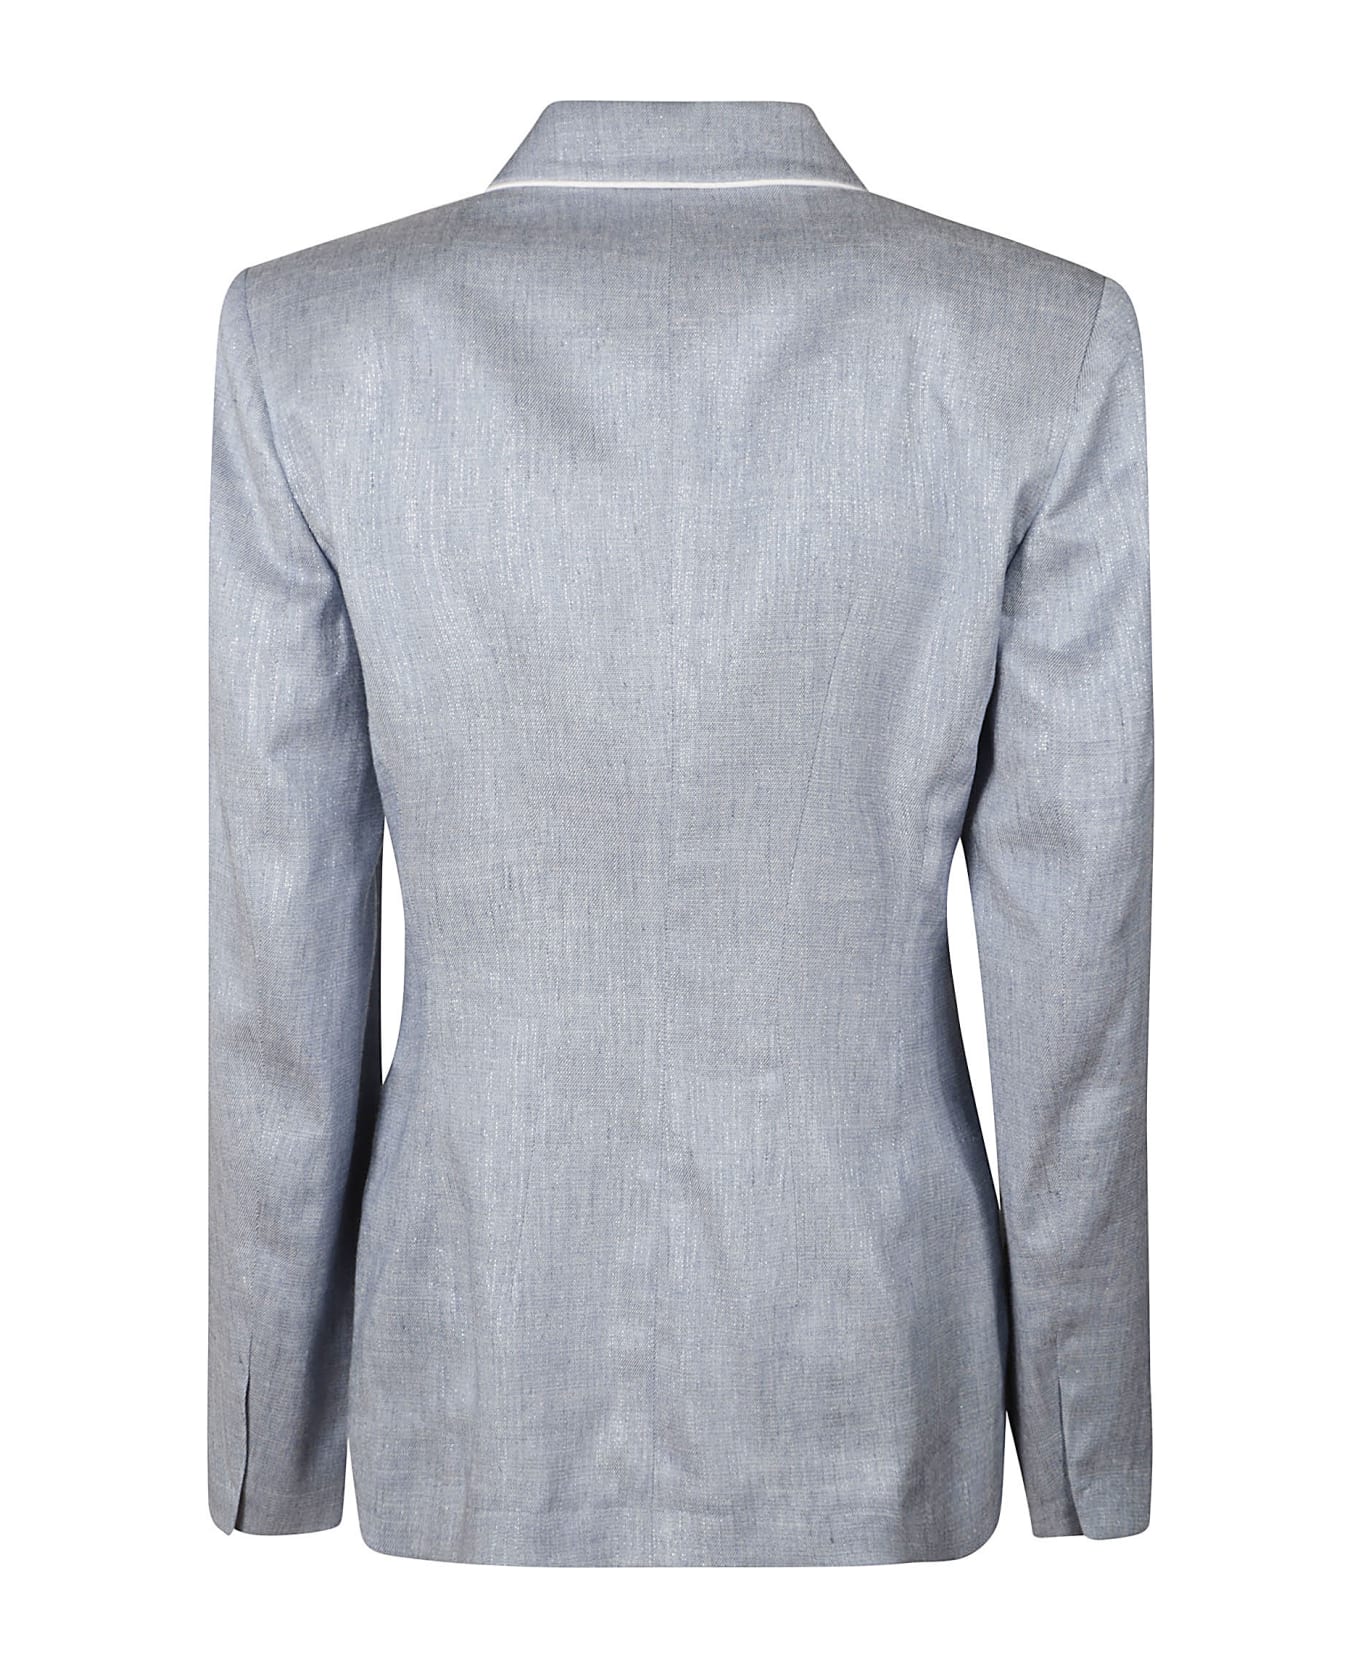 Genny Jacquard Double-breasted Dinner Jacket - LIGHT BLUE ブレザー